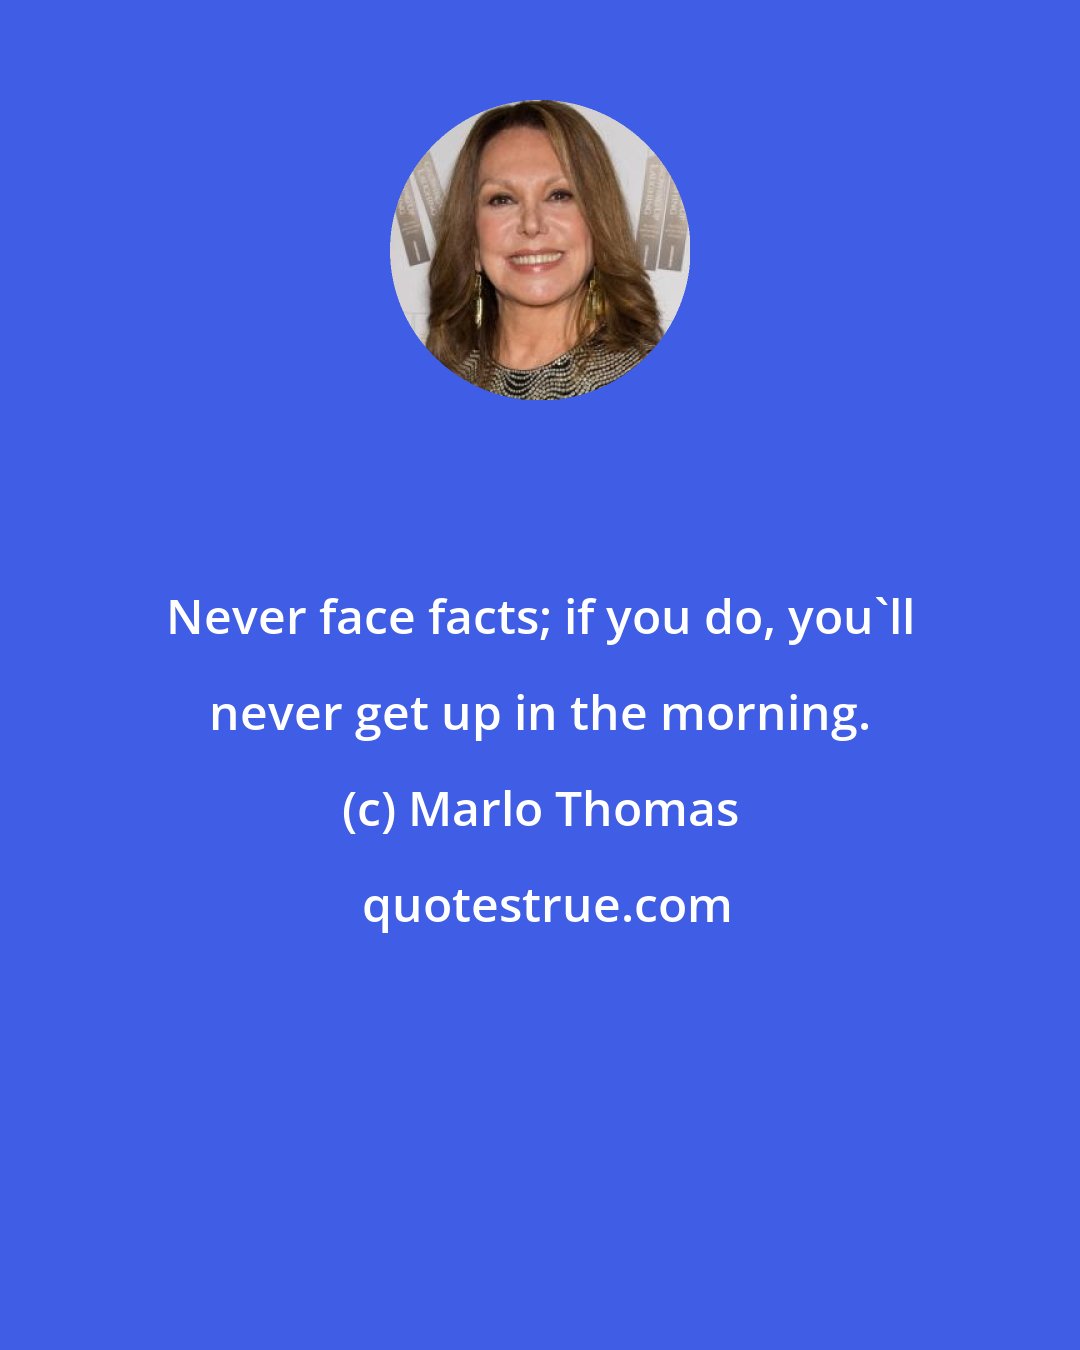 Marlo Thomas: Never face facts; if you do, you'll never get up in the morning.